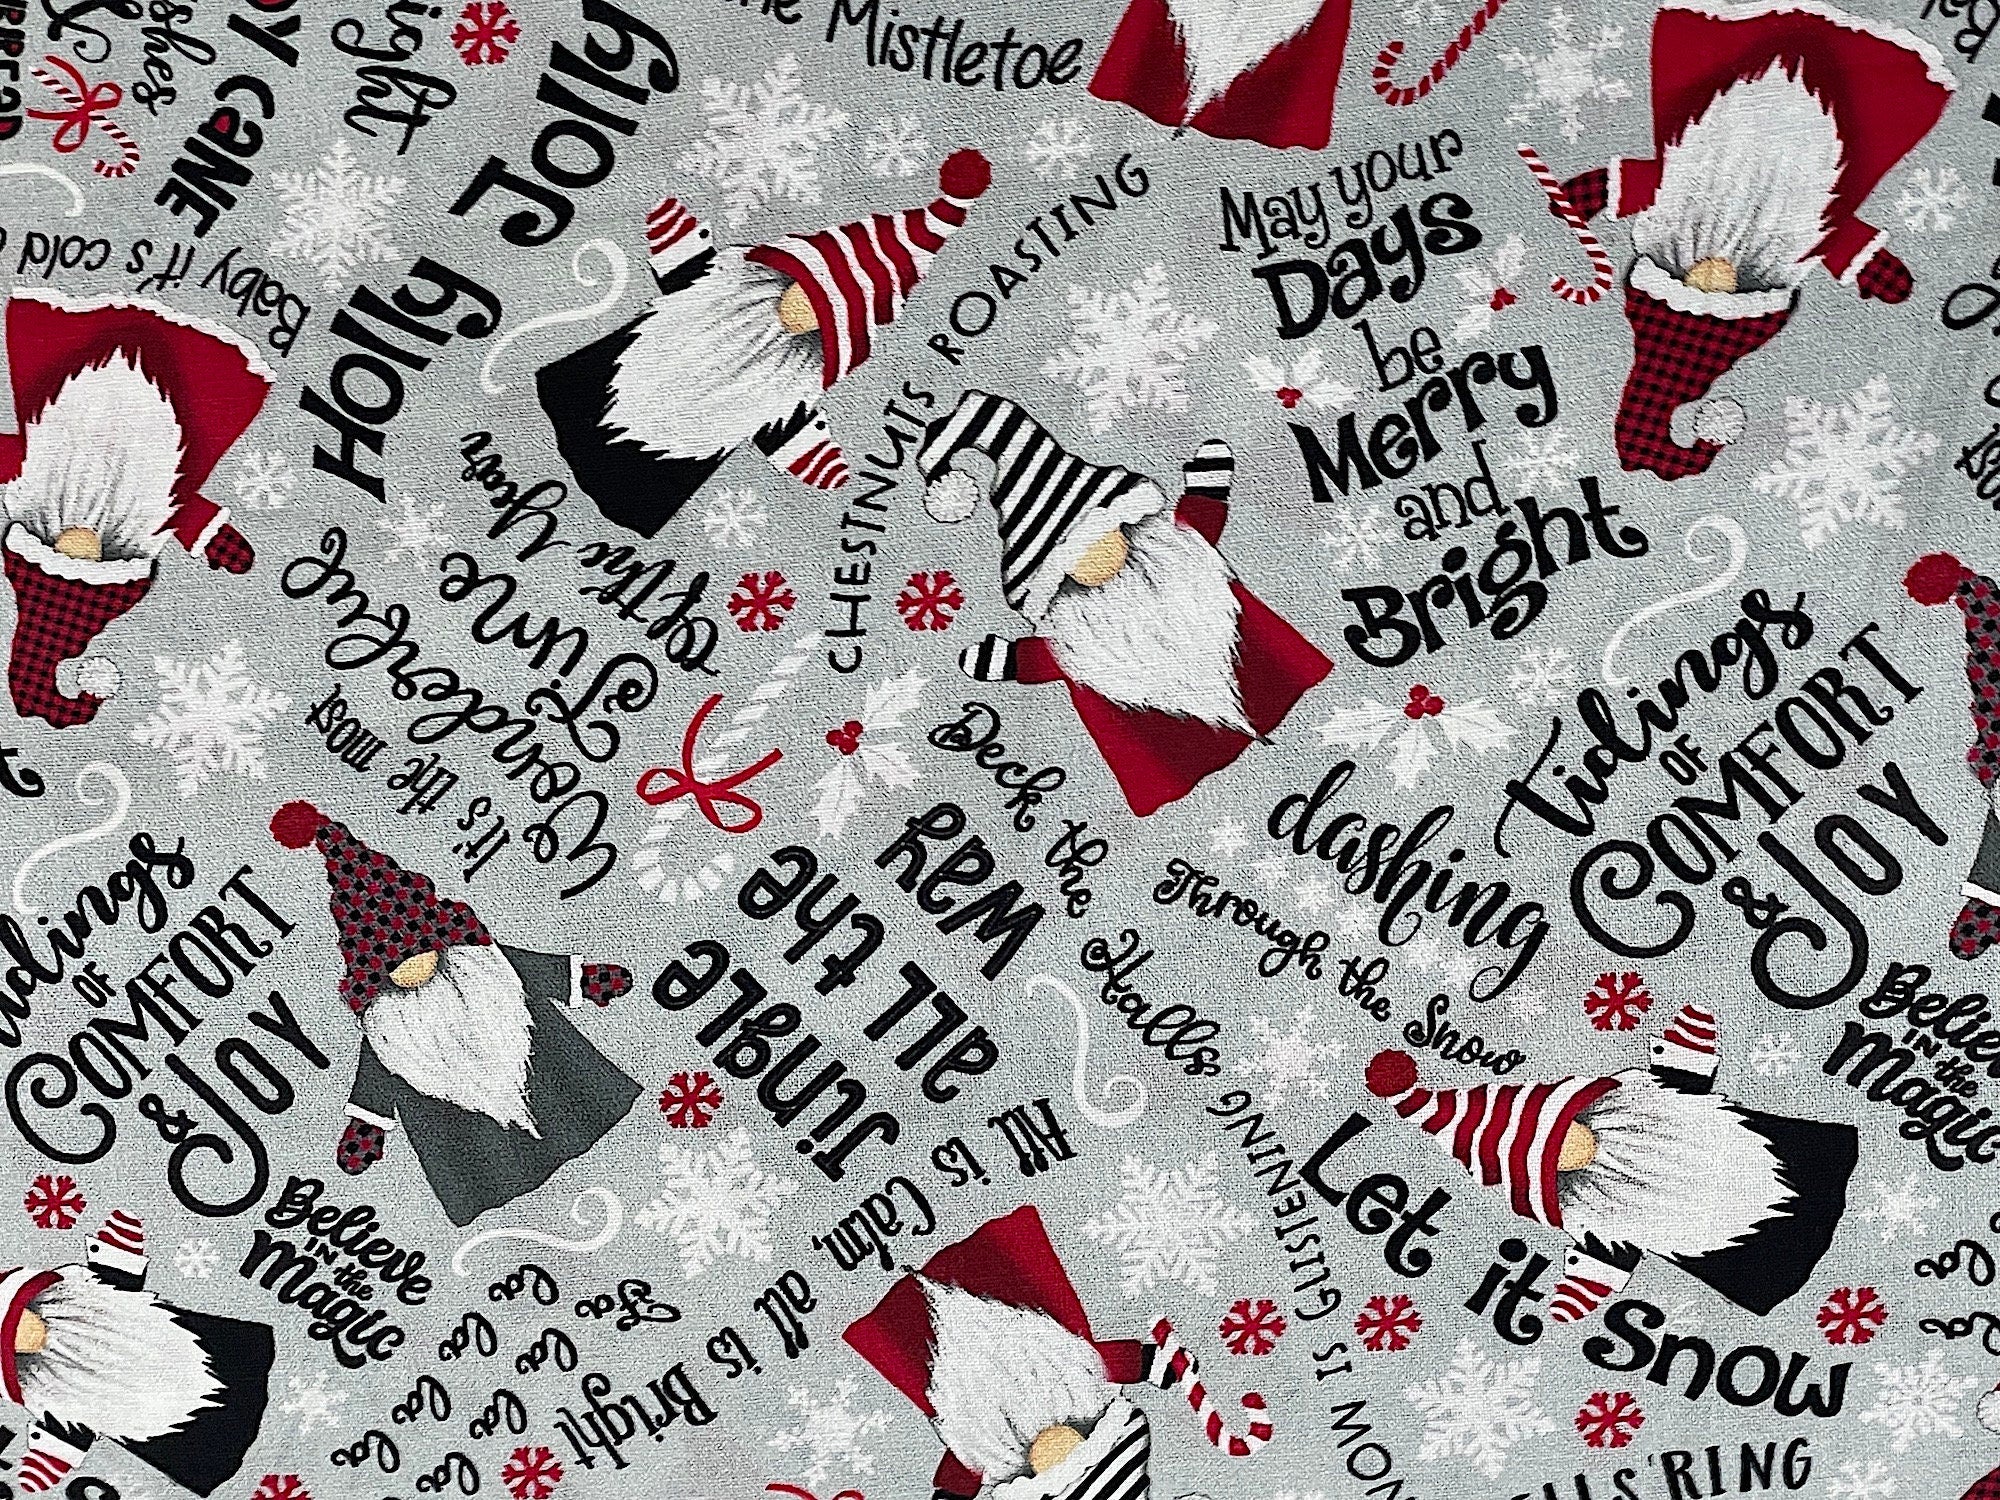 This grey fabric is called gnomes and Christmas wishes text and is covered with gnomes and sayings. Some of the sayings are jingle all the way, tidings of comfort and joy, holly jolly, chestnuts roasting and more